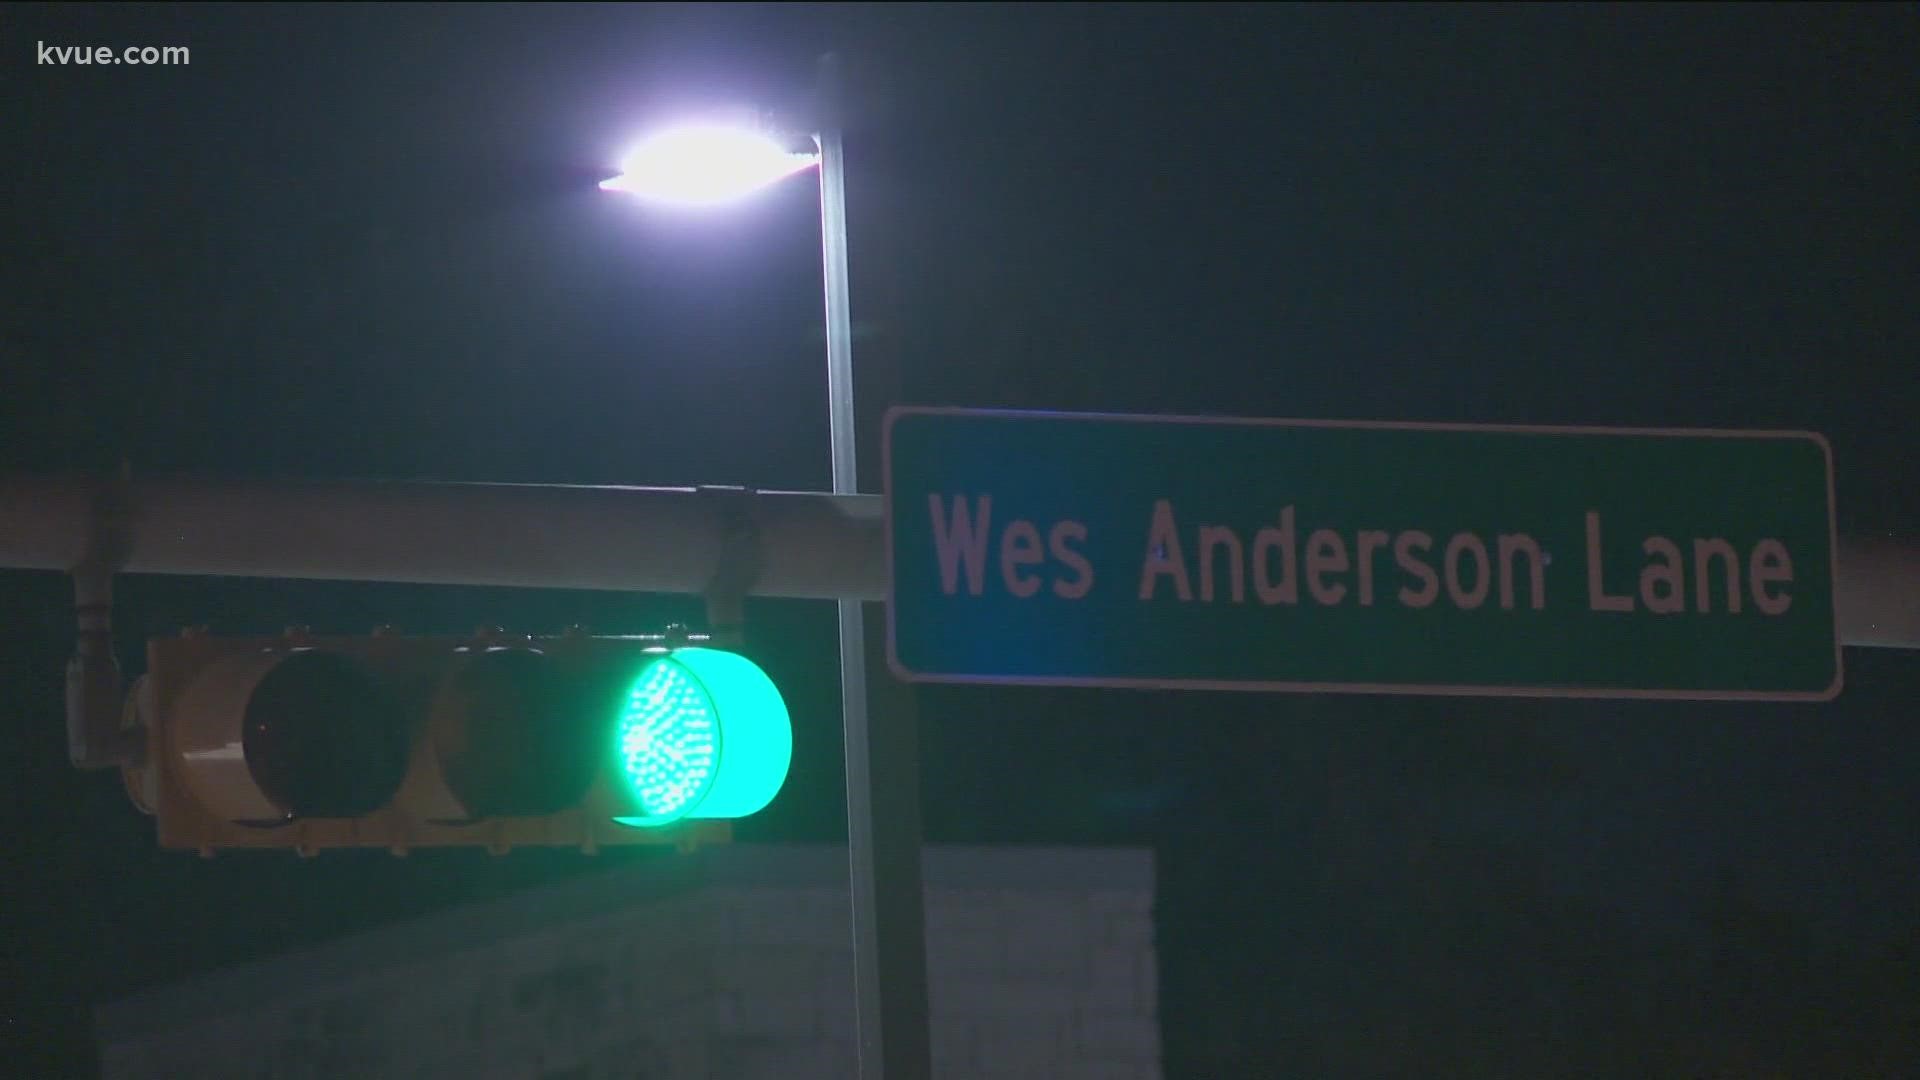 In honor of "The French Dispatch," West Anderson Lane has temporarily become "Wes Anderson Lane."